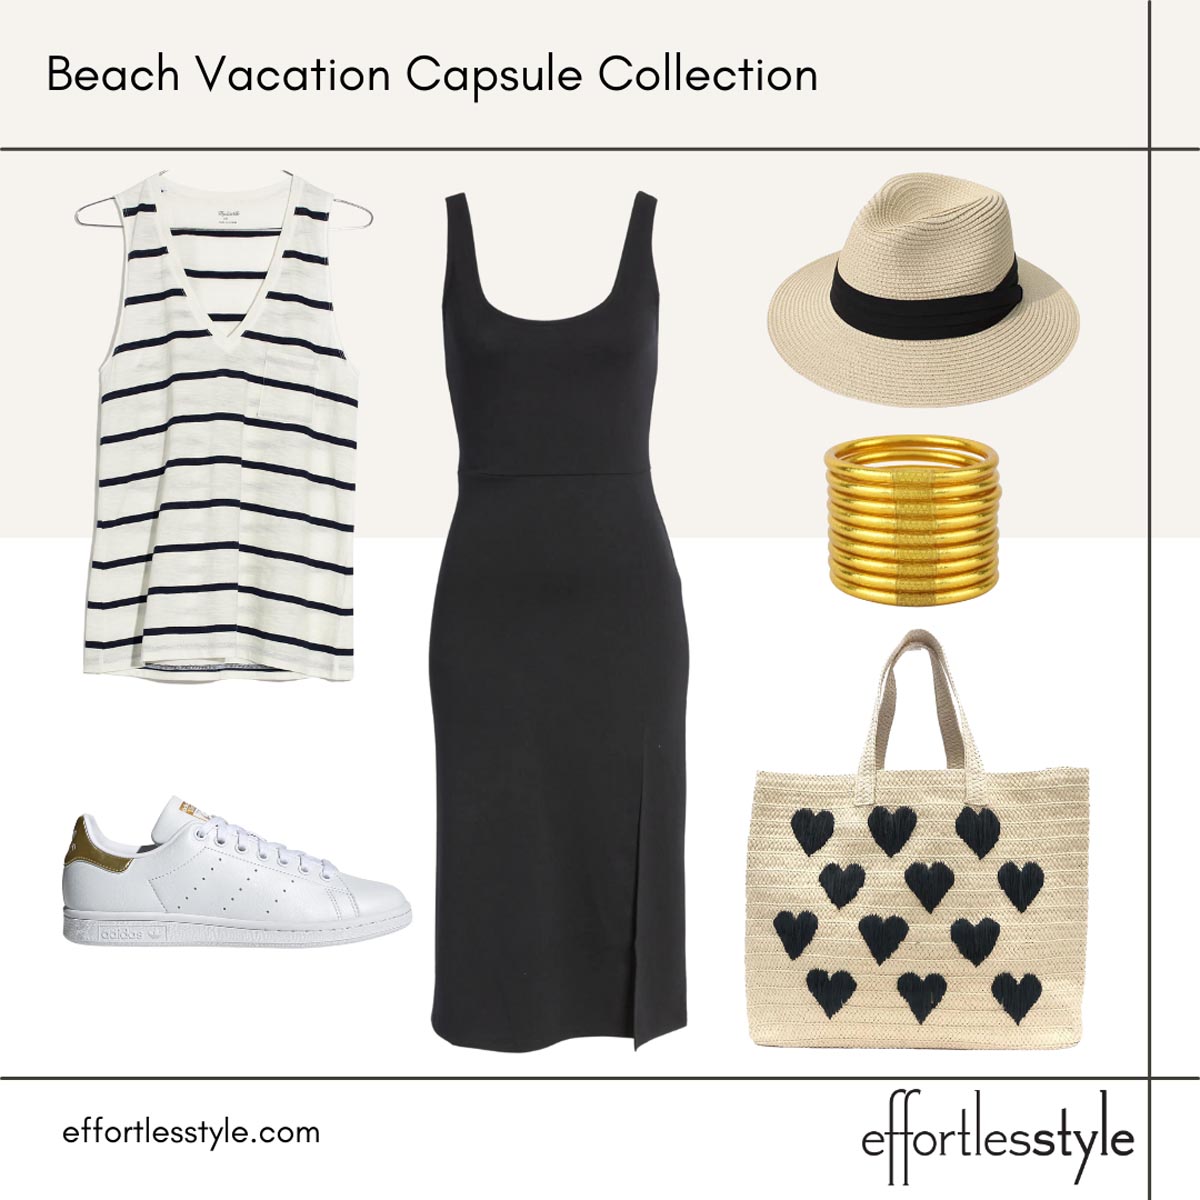 styled looks midi dress how to wear sneakers with a dress sneakers with a midi dress beach hat summer fedora reasonably priced fedora packable Beach hat